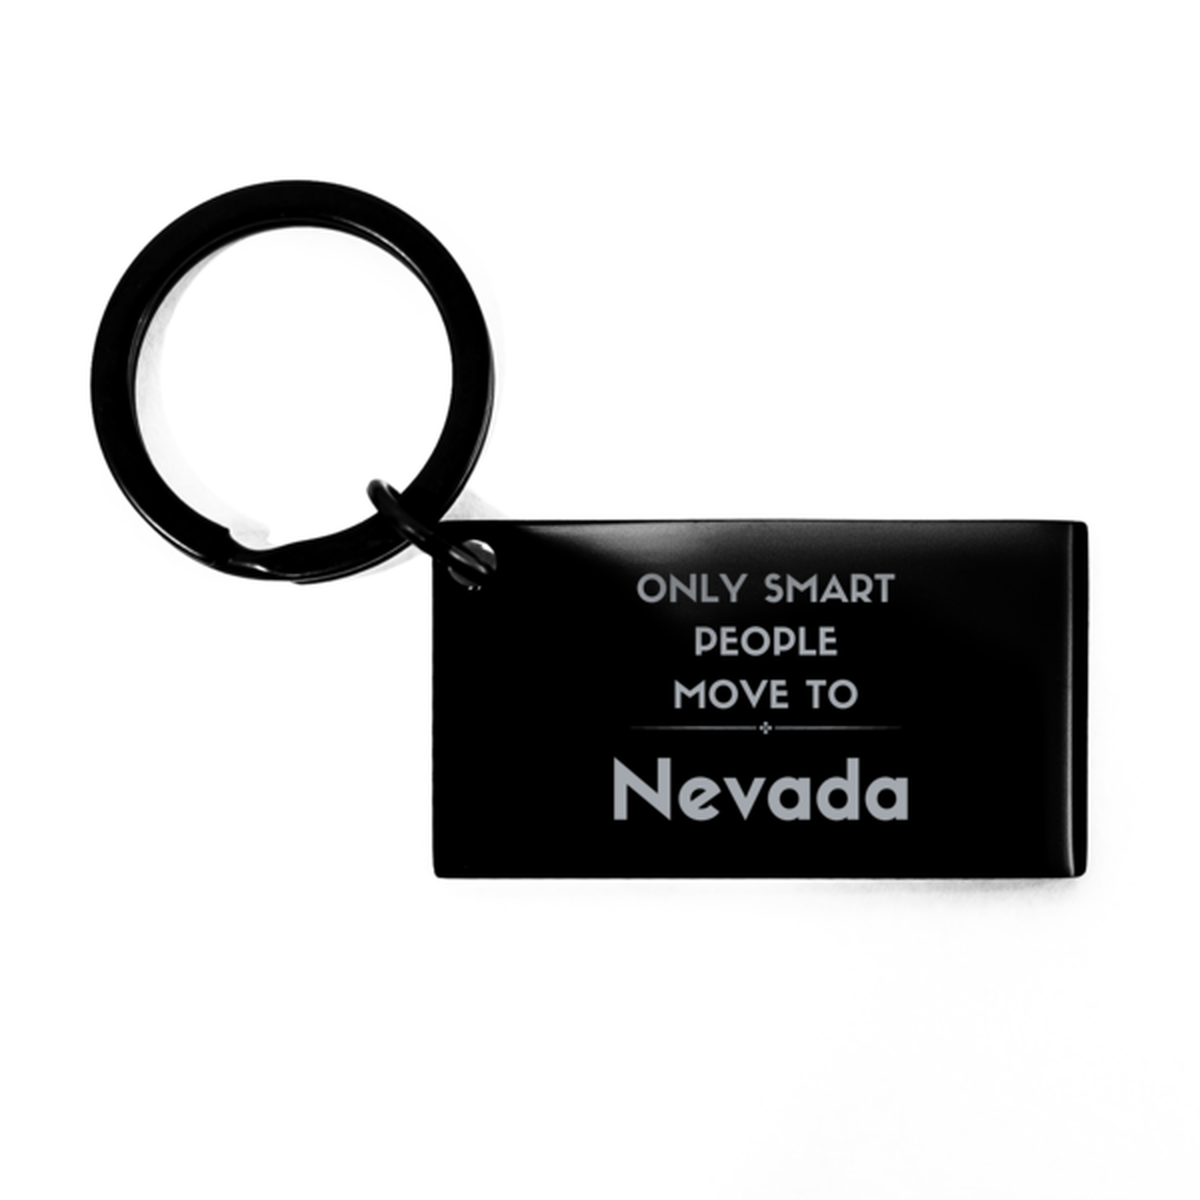 Only smart people move to Nevada Keychain, Gag Gifts For Nevada, Move to Nevada Gifts for Friends Coworker Funny Saying Quote